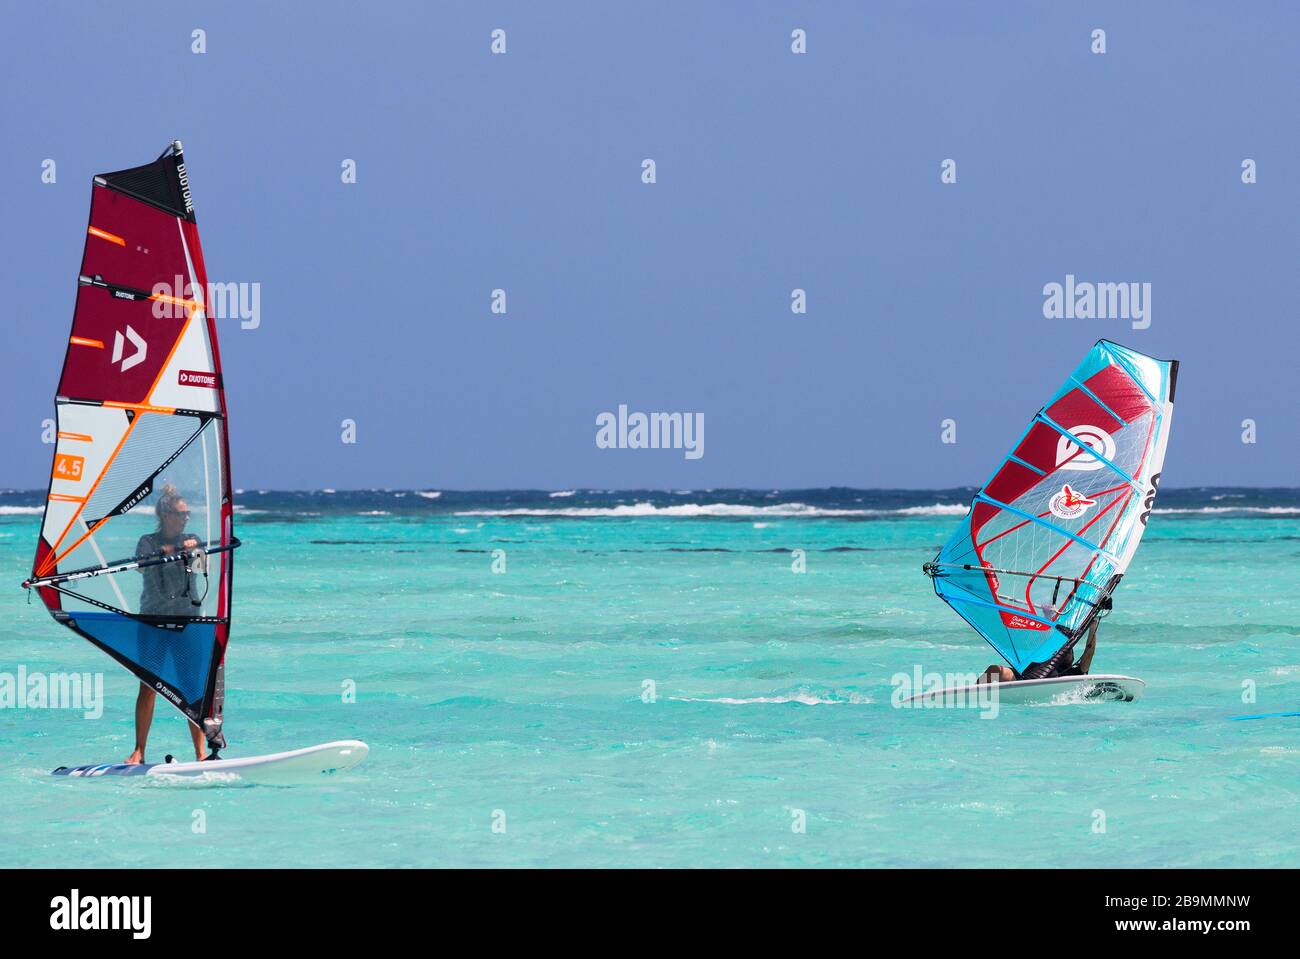 Winds power wind surfing in the blue waters of Bonaire, Netherlands Antillies, Caribbean Stock Photo